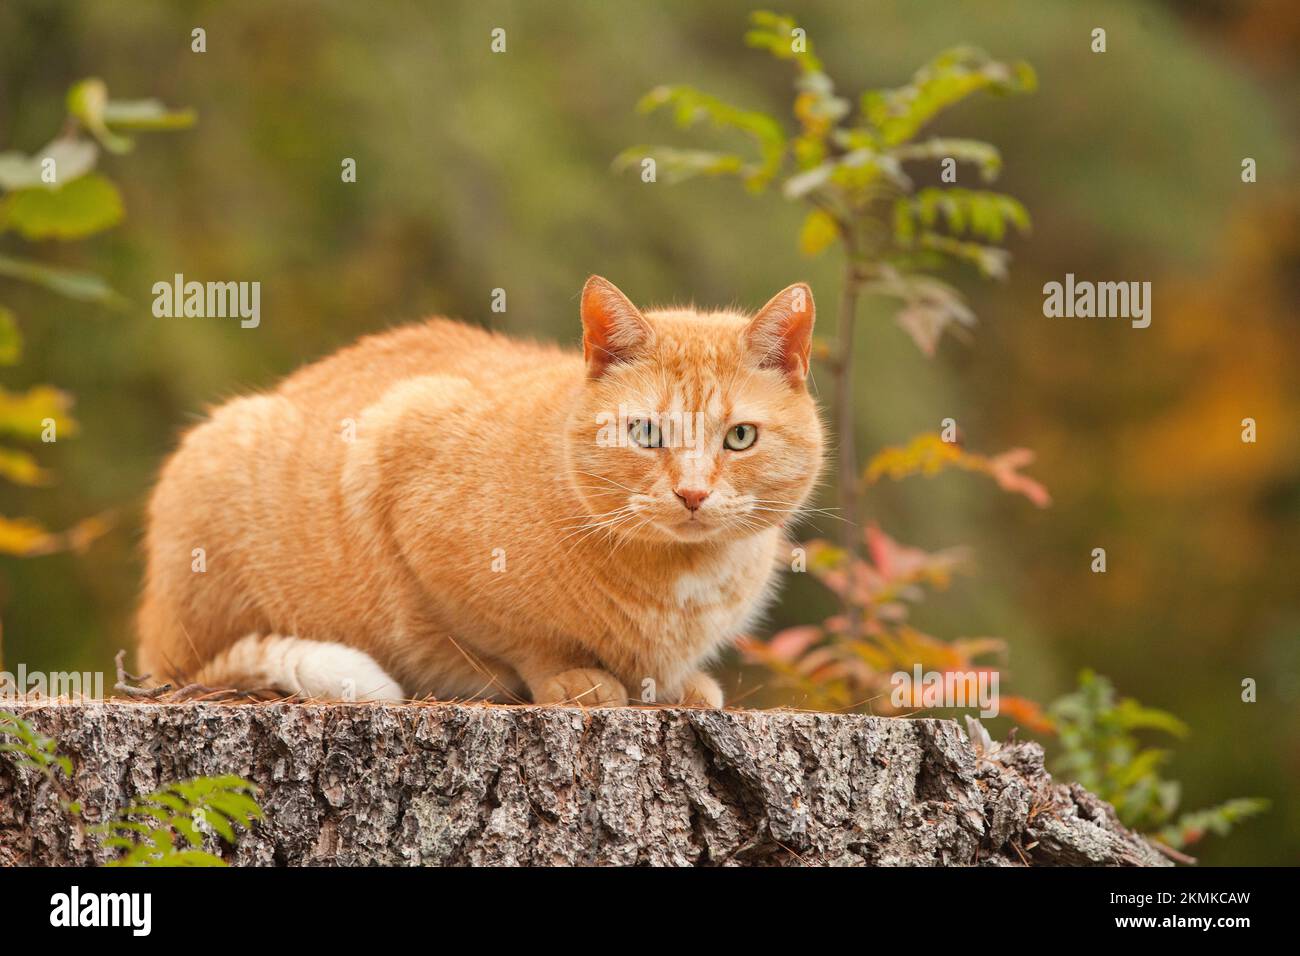 Big fat yellow cat in the outdoors during the fall season. Overweight male orange tabby cat outside in autumn on a blurry background. Stock Photo